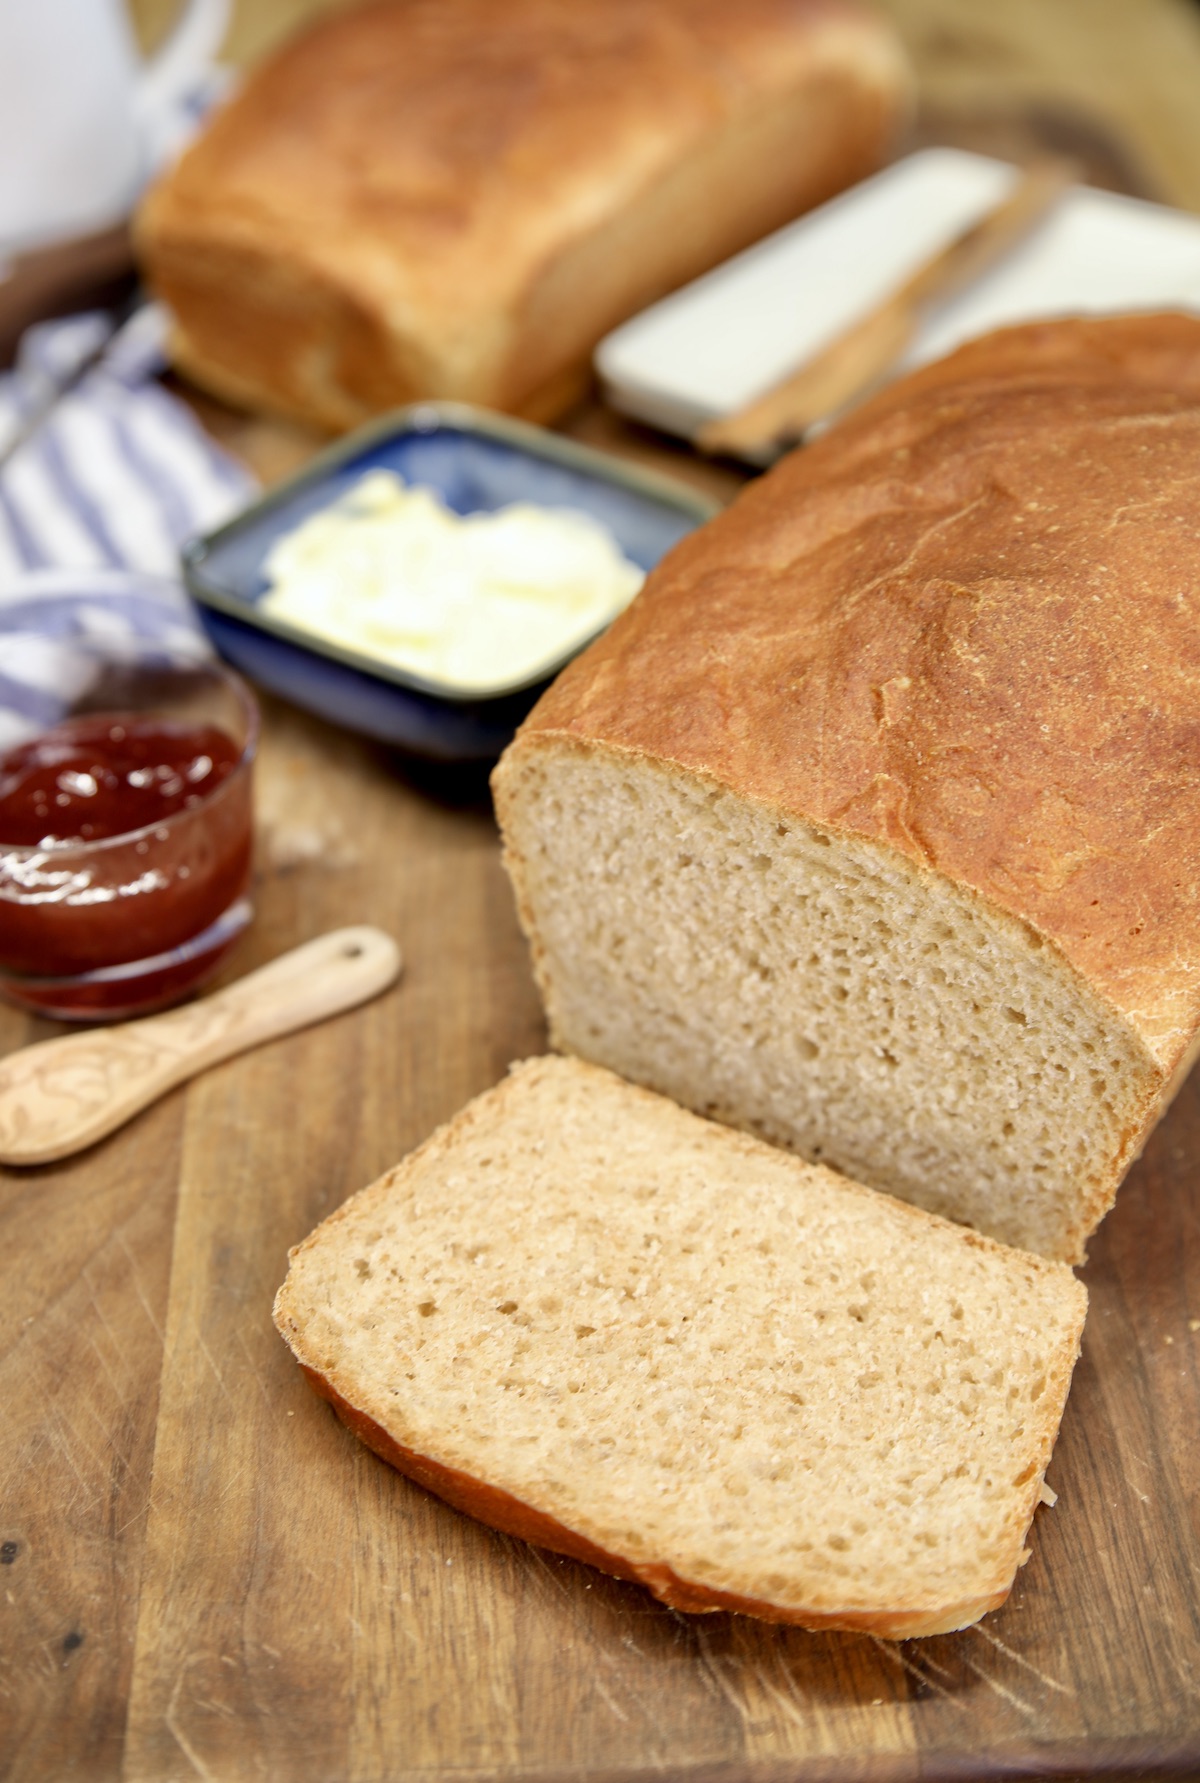 Loaf of bread partially sliced with butter and jam to the side.